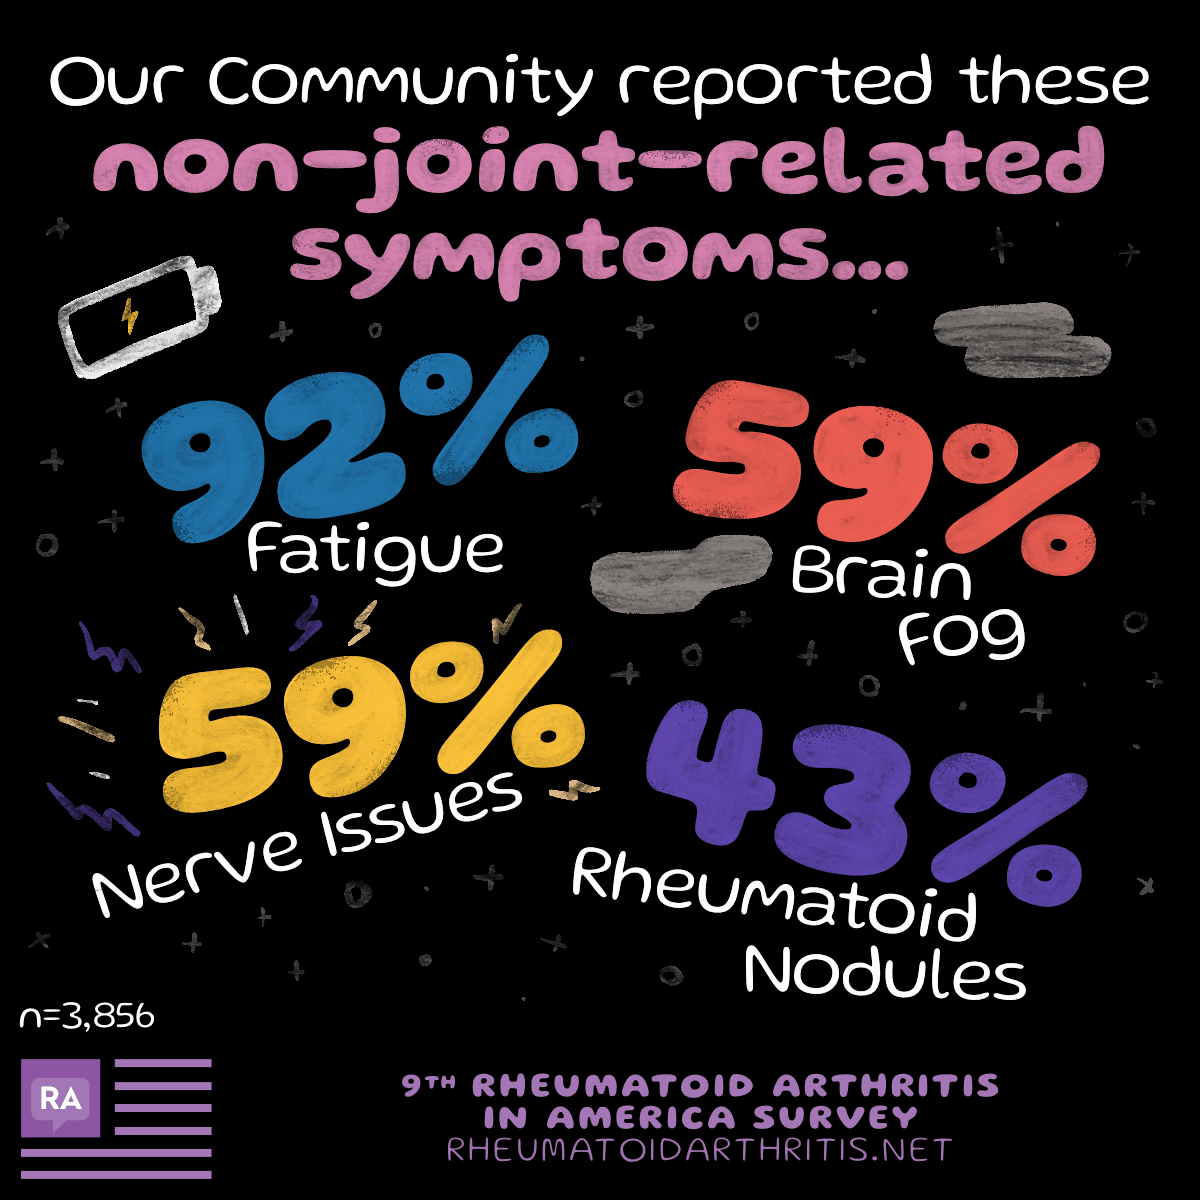 Percentages of people with non-joint-related rheumatoid arthritis symptoms.